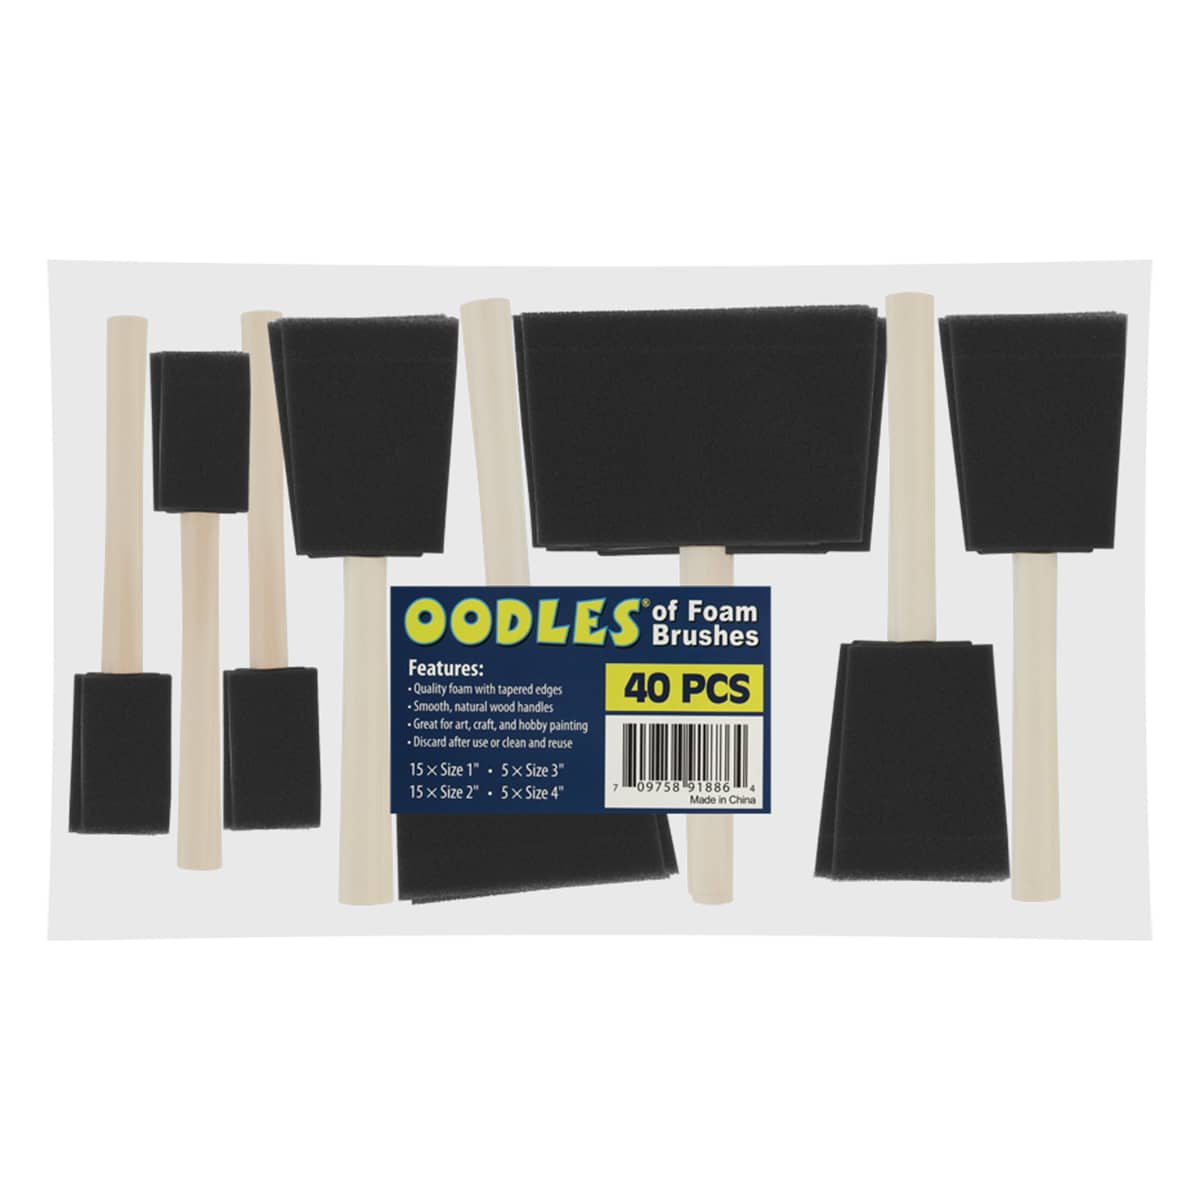 Oodles of Foam Brushes Pack of 40 